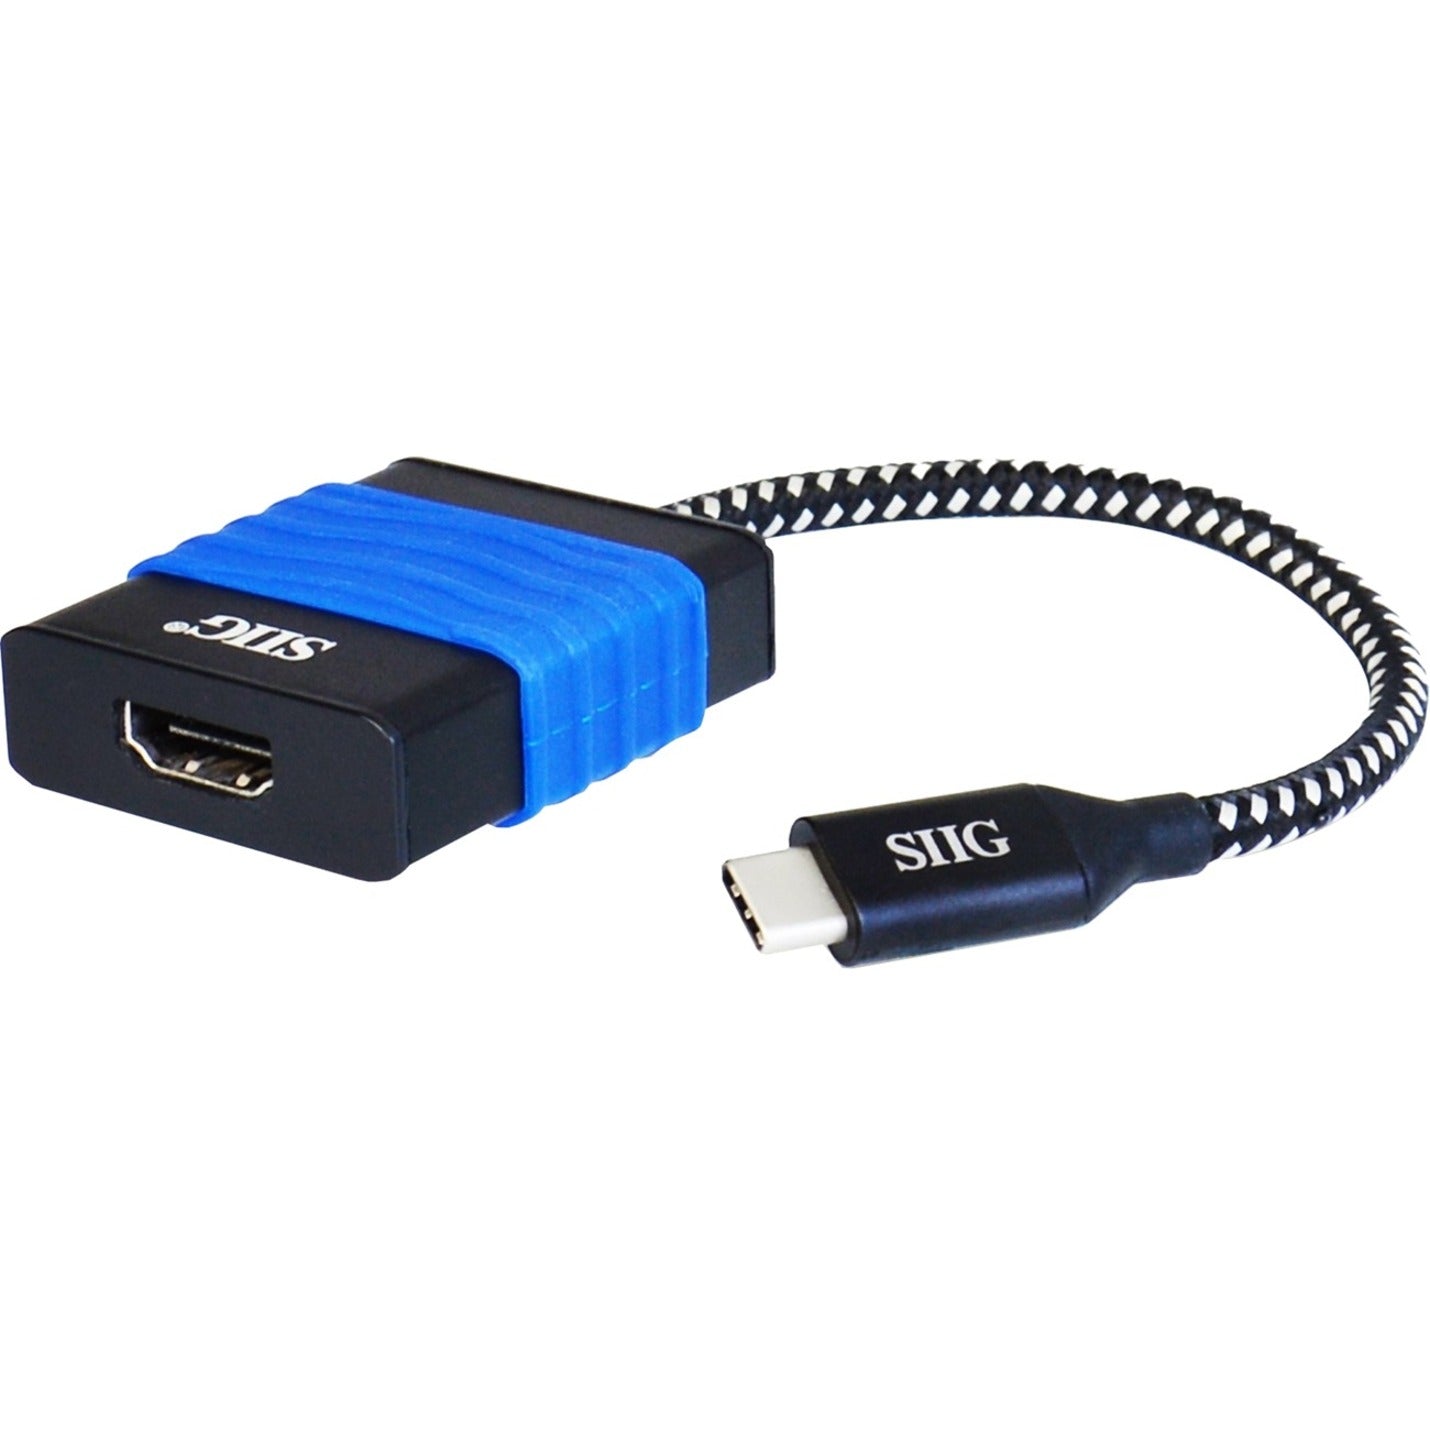 SIIG - SIIG CB-TC0014-S2 - CB-TC0014-S2 USB Type-C - USB Tipo C to - a HDMI - HDMI Cable Adapter - Adattatore Cavo 4Kx2K - 4Kx2K Connect - Collega Your - Il tuo PC - PC to - a a - uno 4K Display - Display 4K